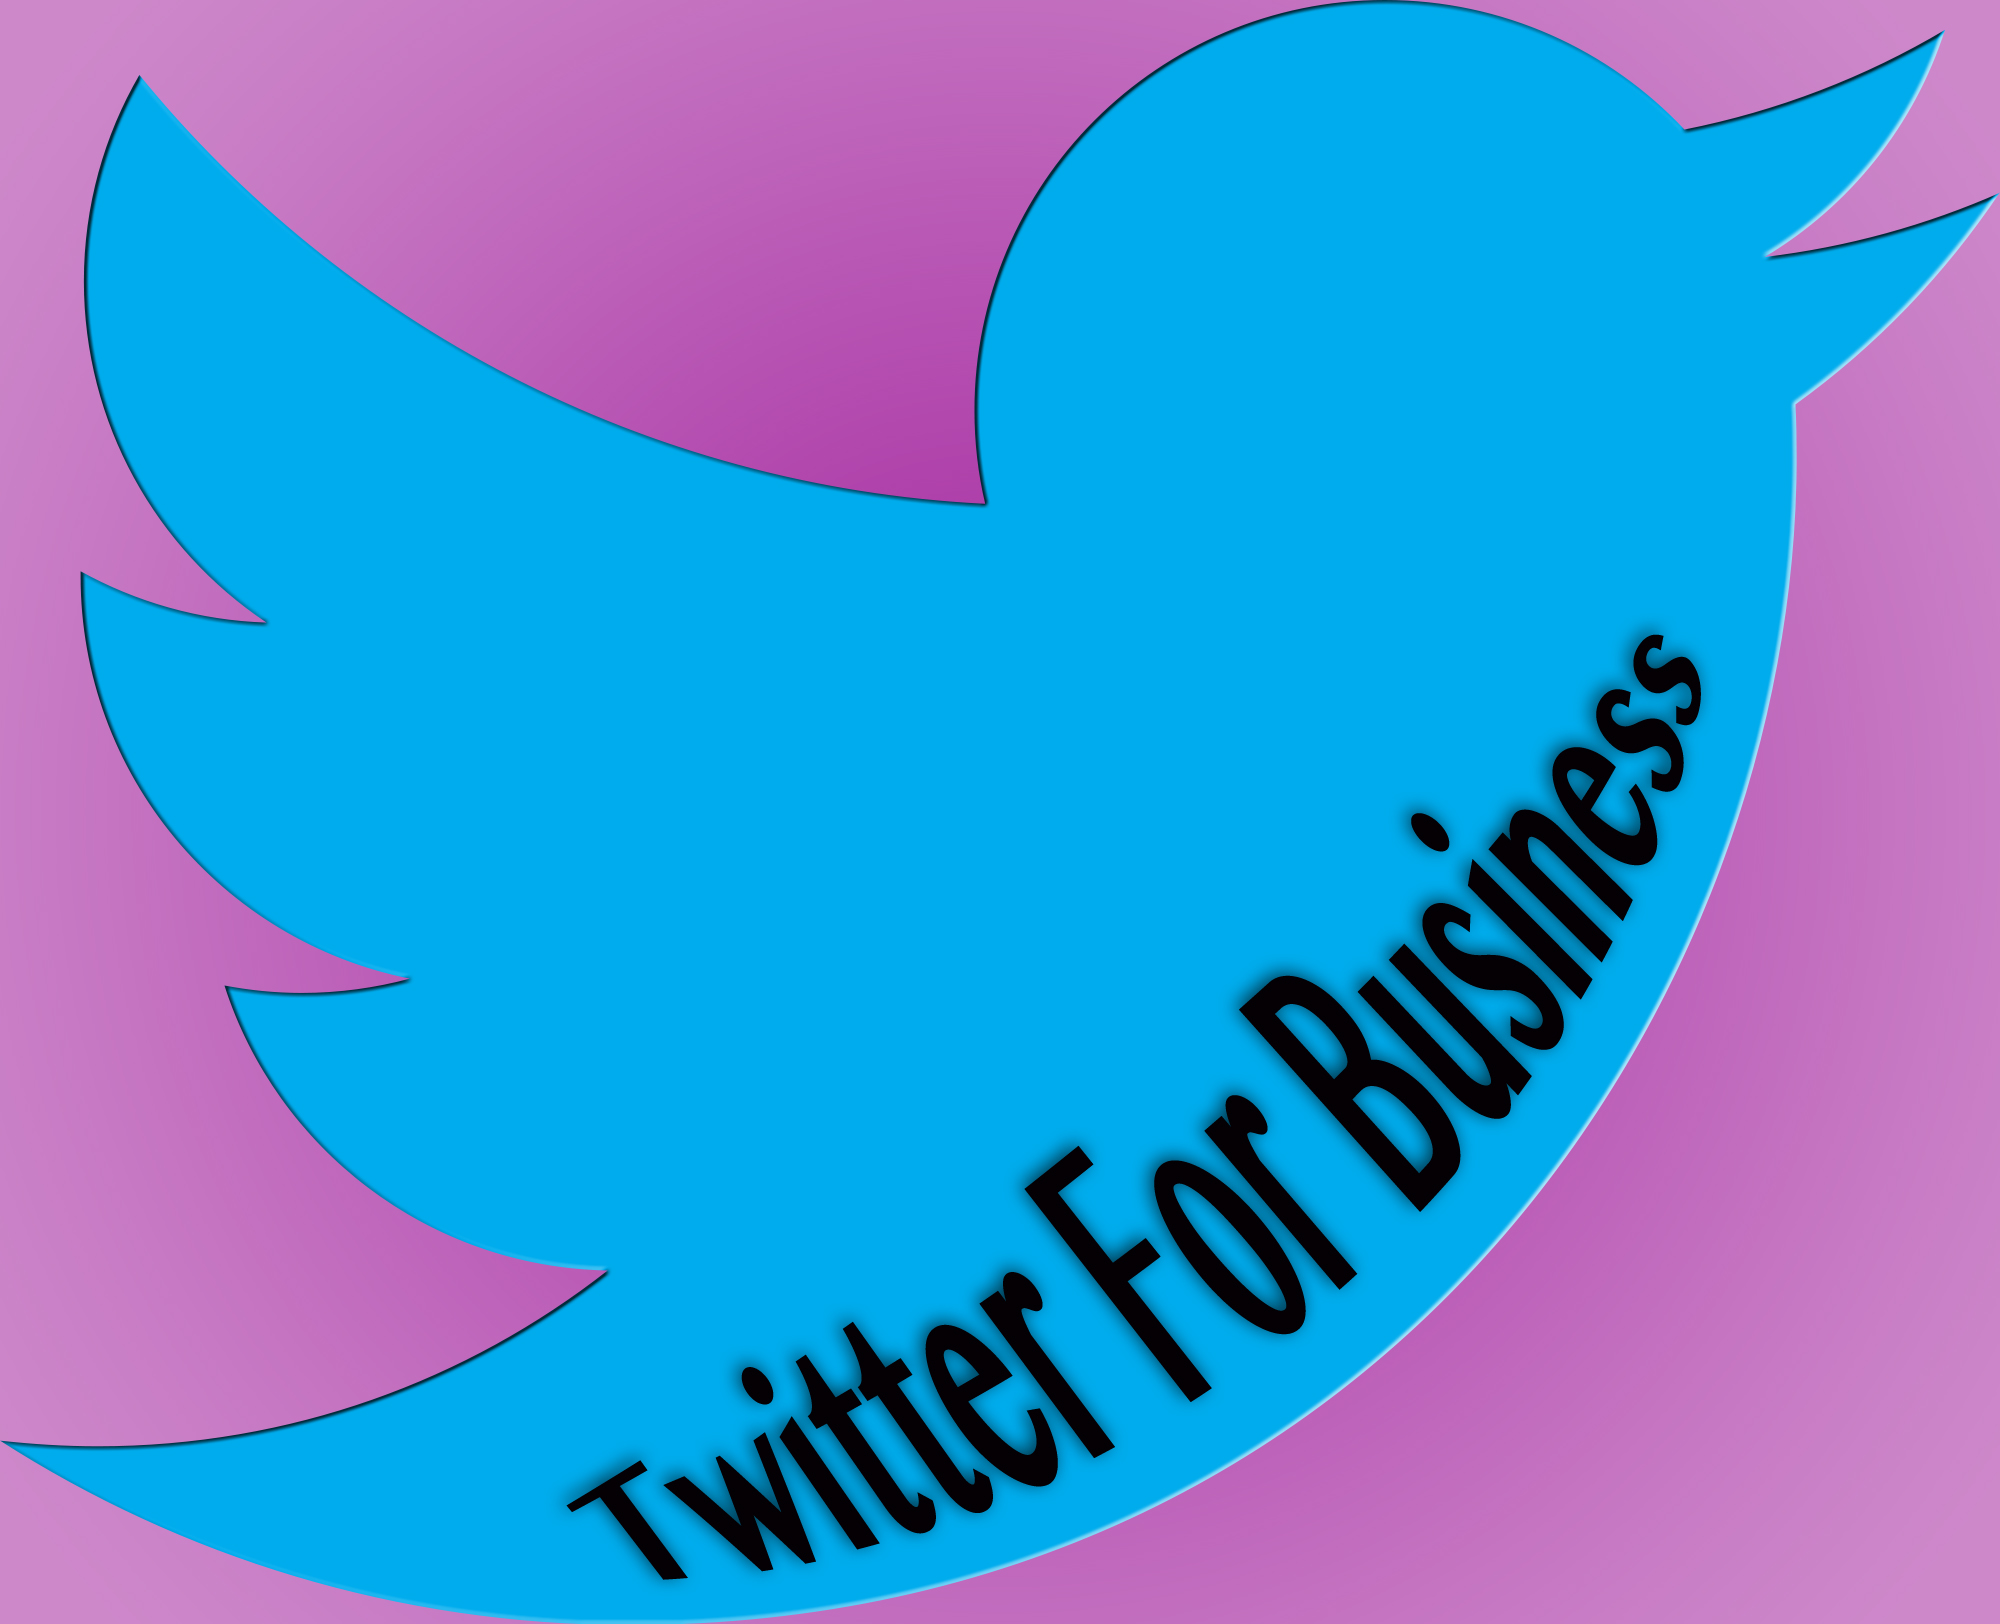 Twitter’s Top 5 Business Uses